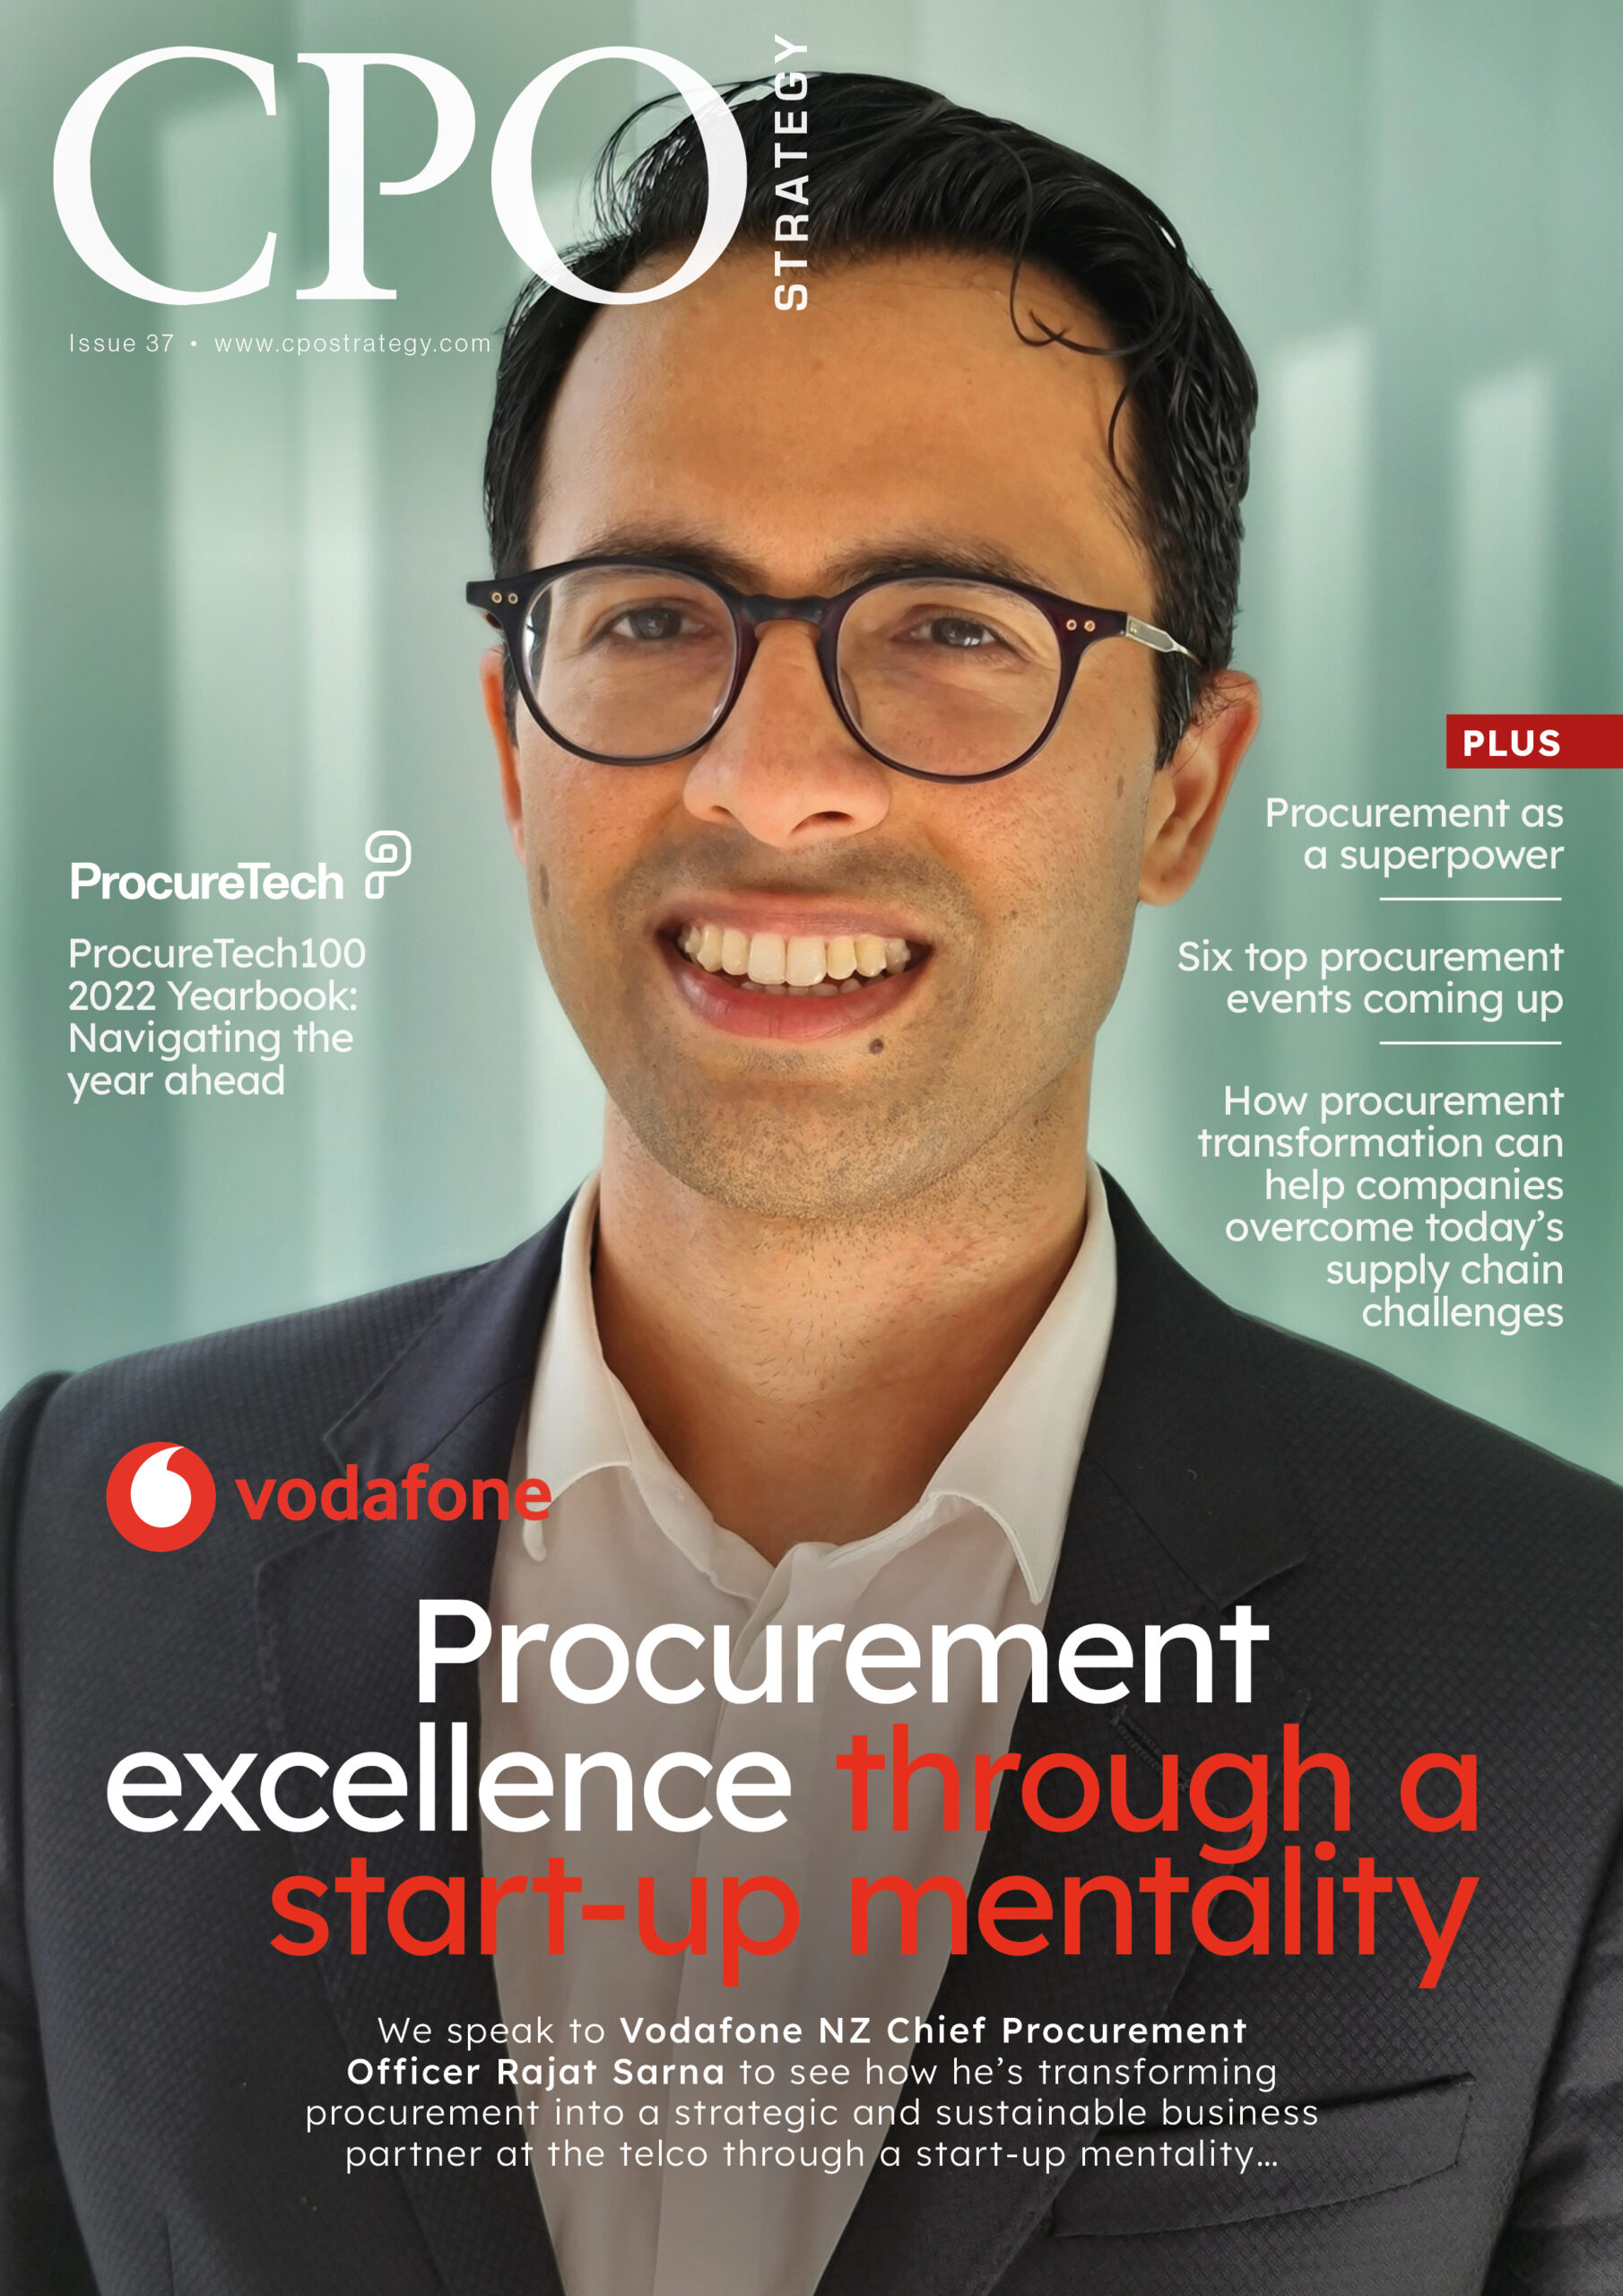 This month’s cover story is an exclusive and compelling insight into the procurement strategy at Vodafone New Zealand. 